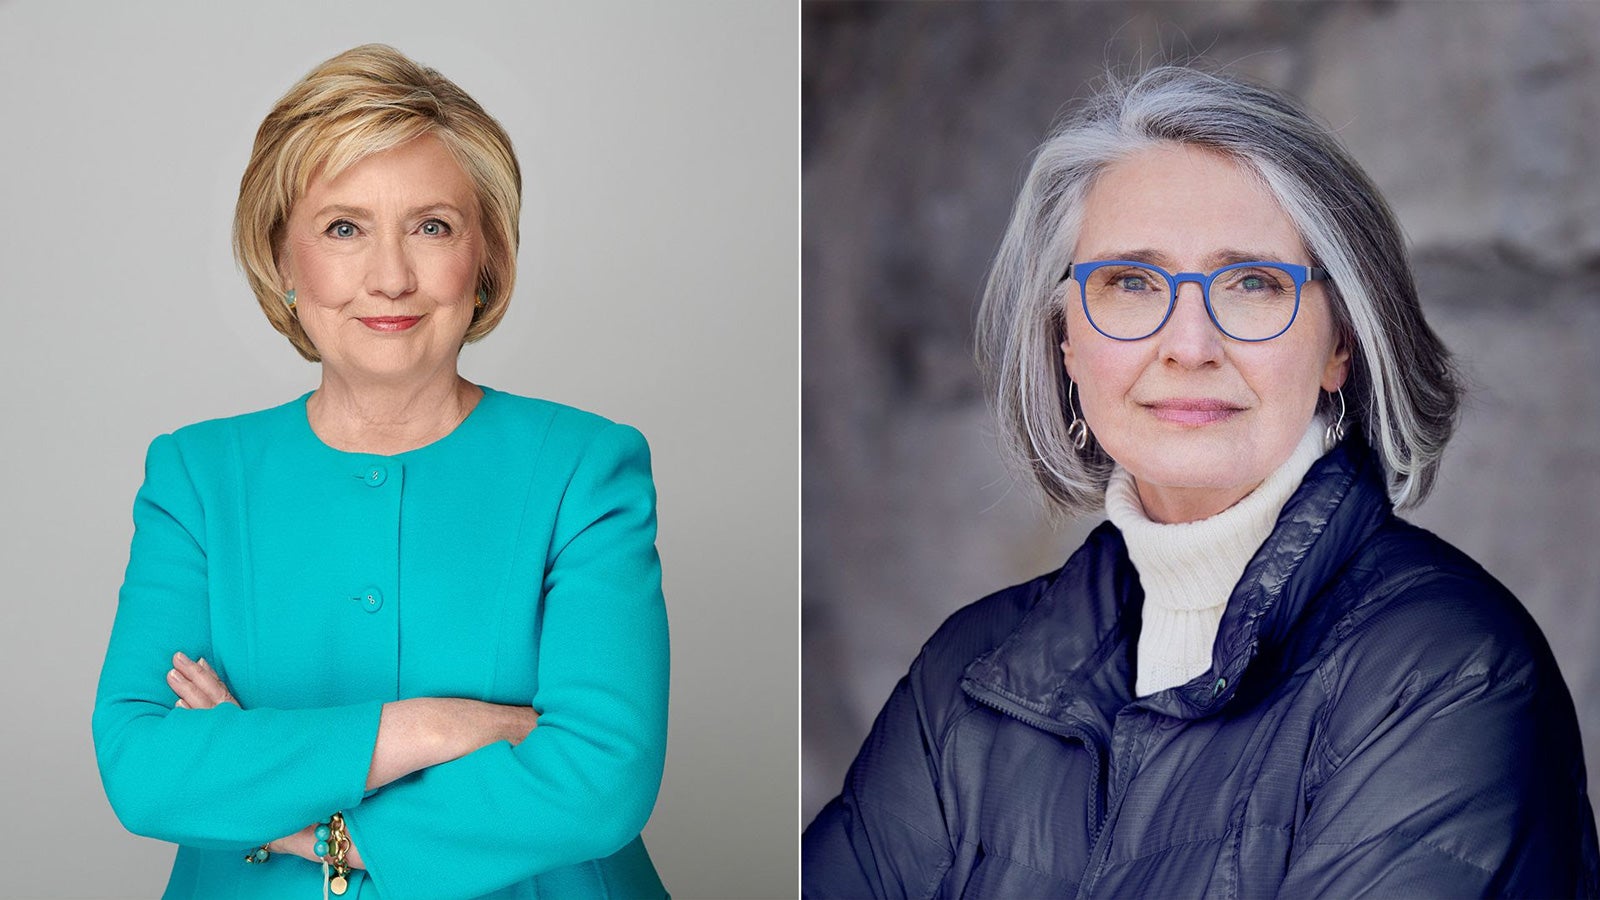 Image of Hillary Clinton smiling next to an image of Louise Penny